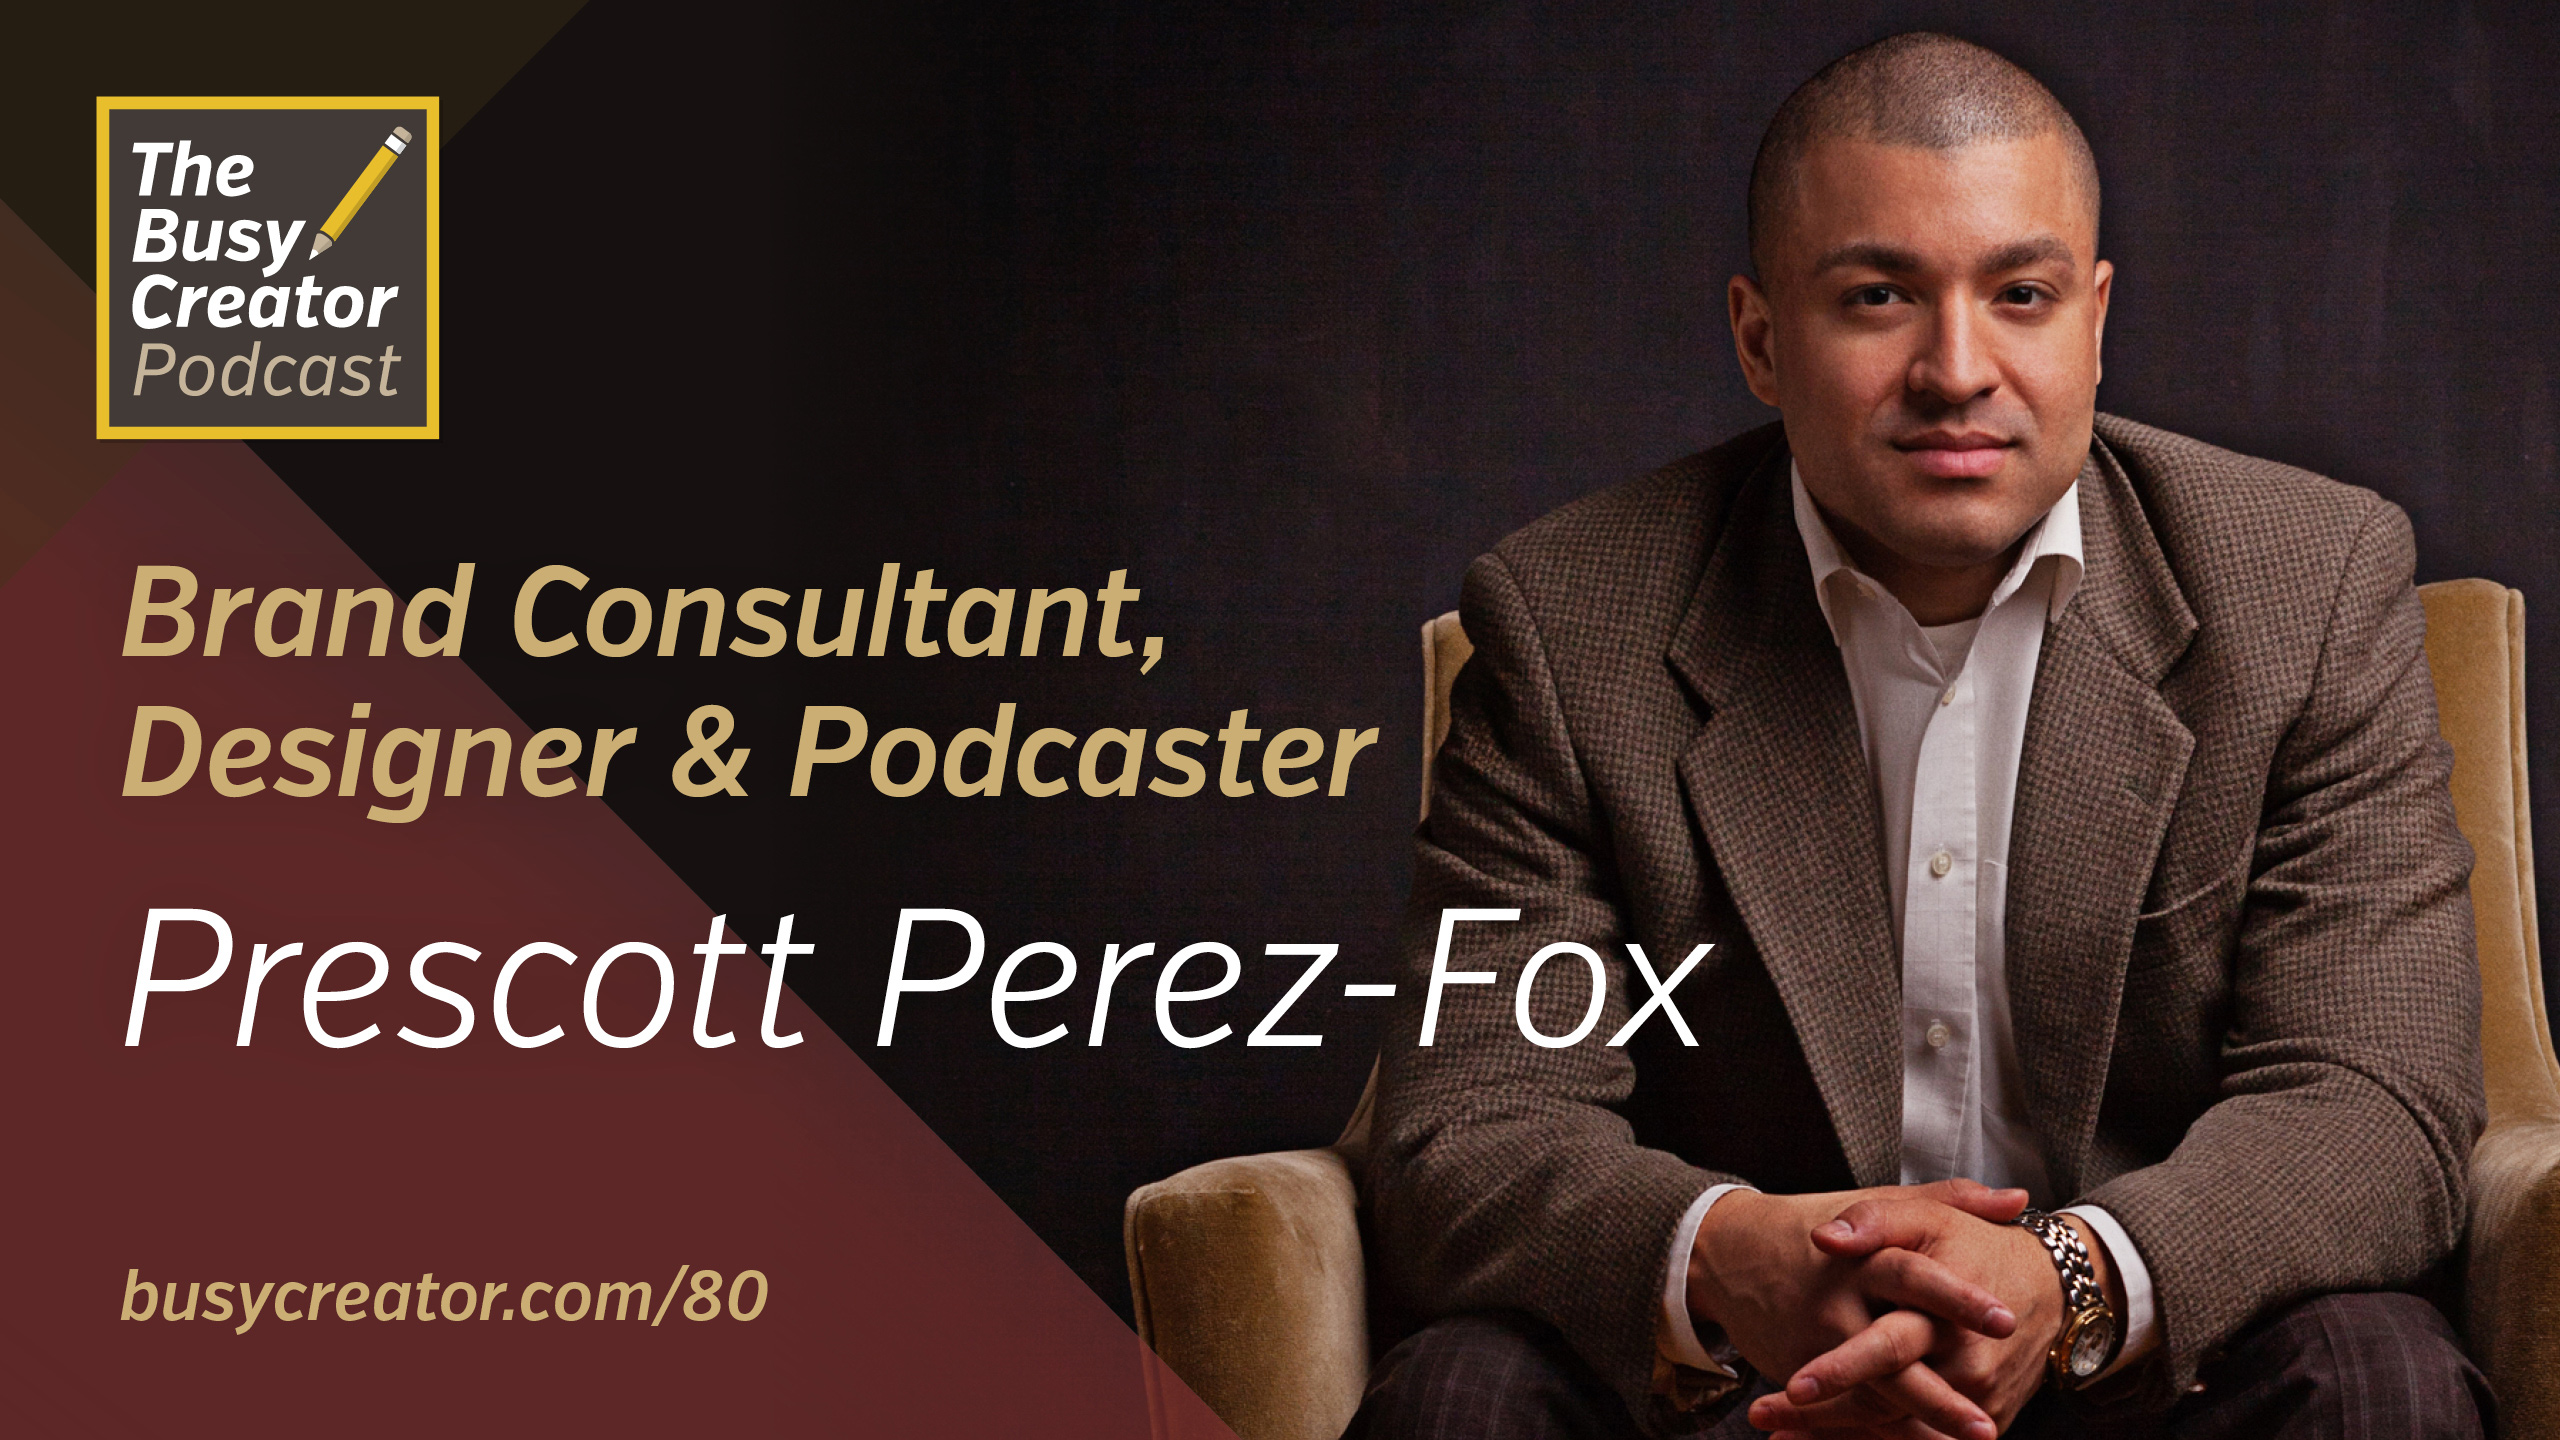 Examining The Modern Creative Workforce and the Ongoing Struggles of Productive People, with Prescott Perez-Fox